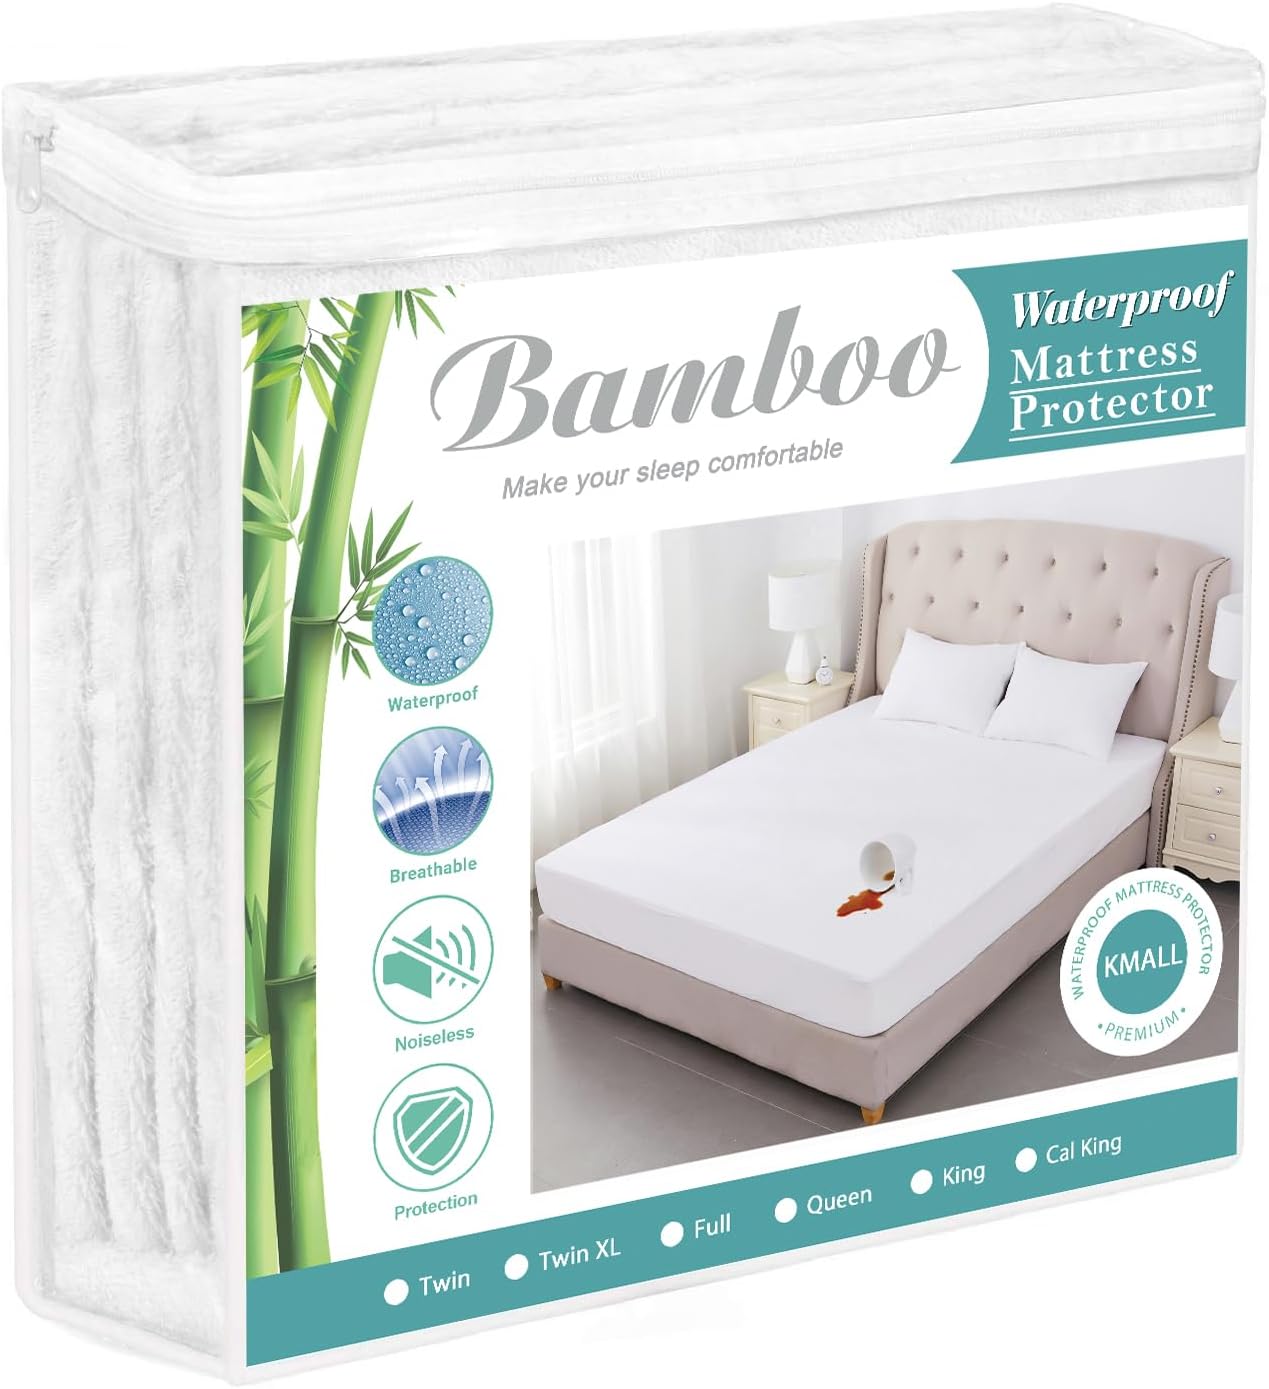 My sister had this mattress cover and I liked when I saw her doing laundry. Love the concept of the waterproof on one side and the terry cloth on the other. Finally bought my own. It washes well, fits my extra deep mattress perfectly. It is very comfortable. Would definitely recommend it to others.